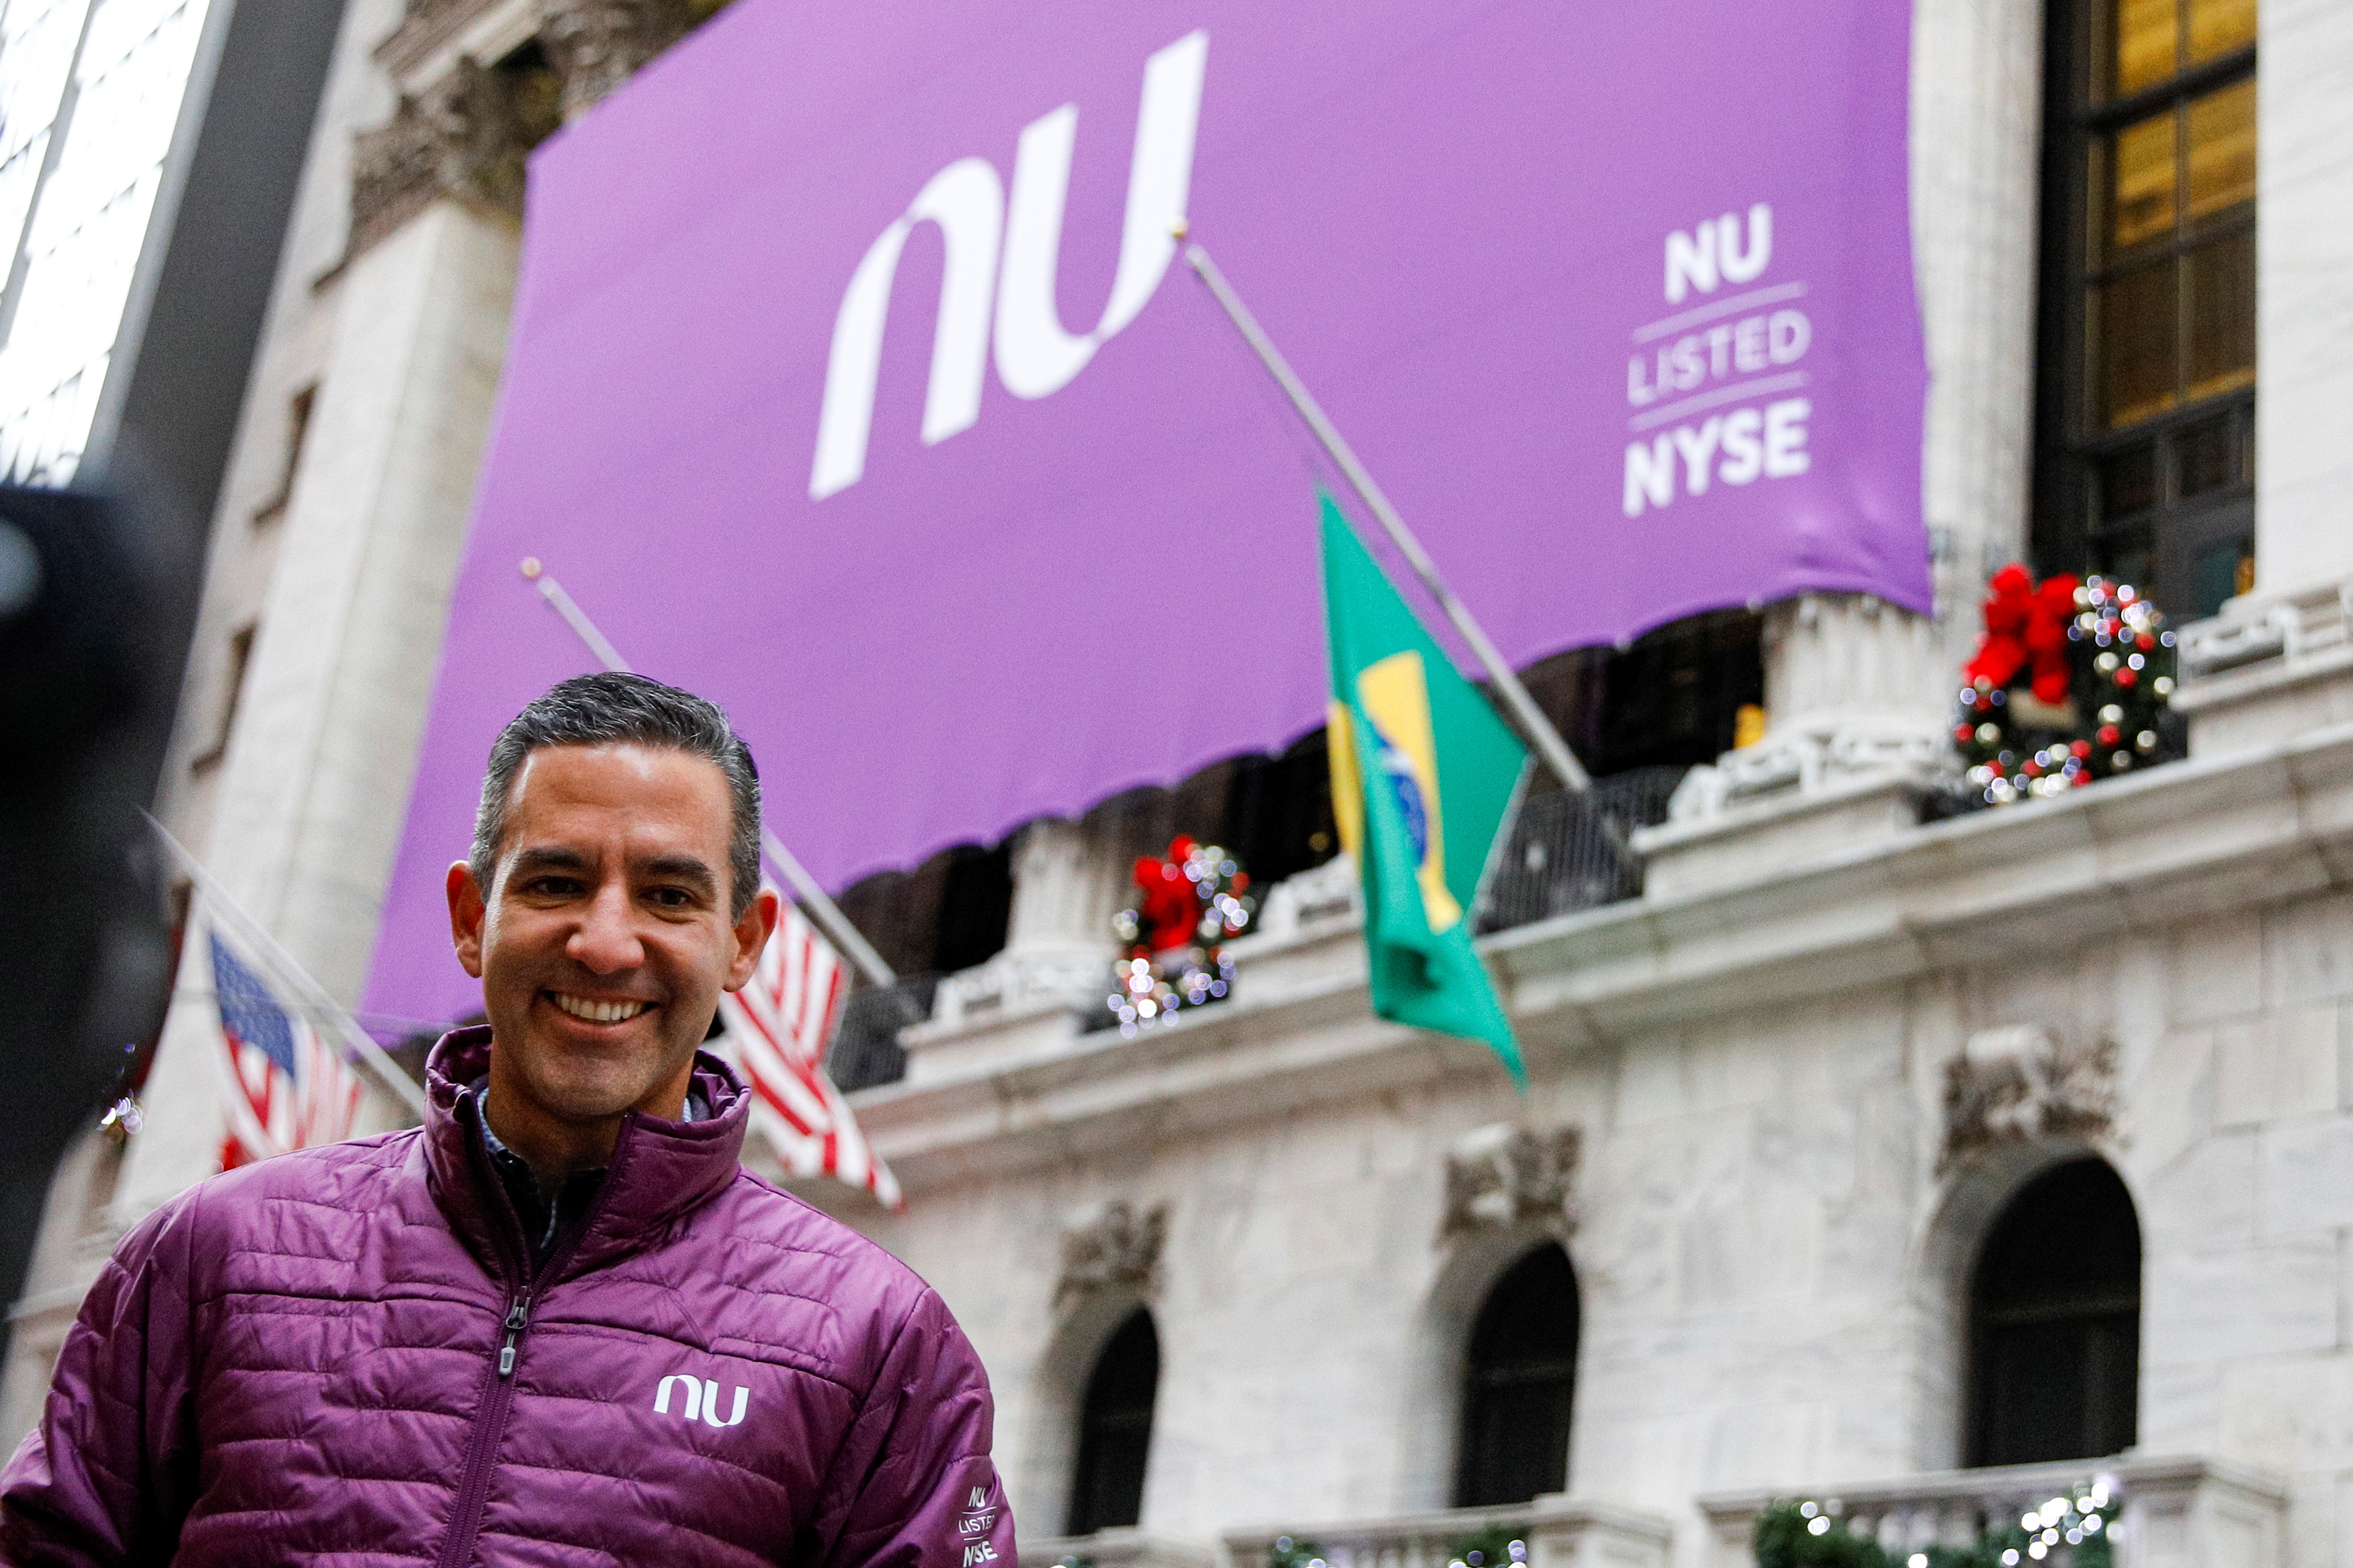 Nubank, a Brazilian FinTech startup celebrates the company’s IPO at the NYSE in New York